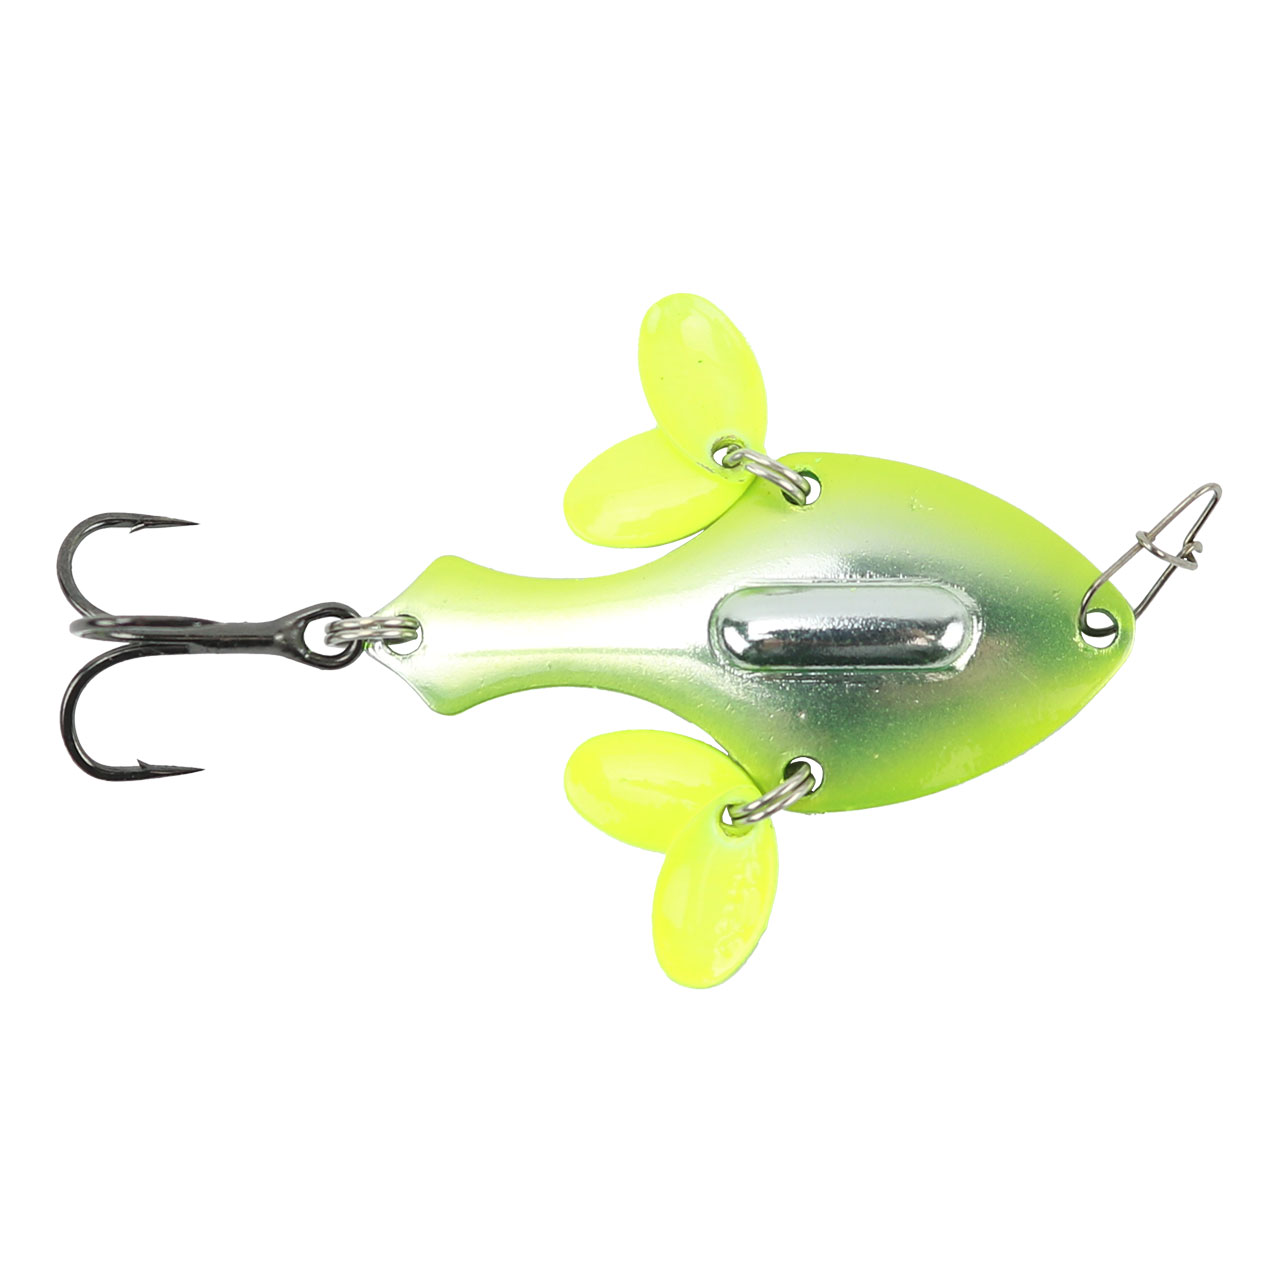 Plug Casting Fishing Lure Blades Spinnerbait Spinnerbait Prop